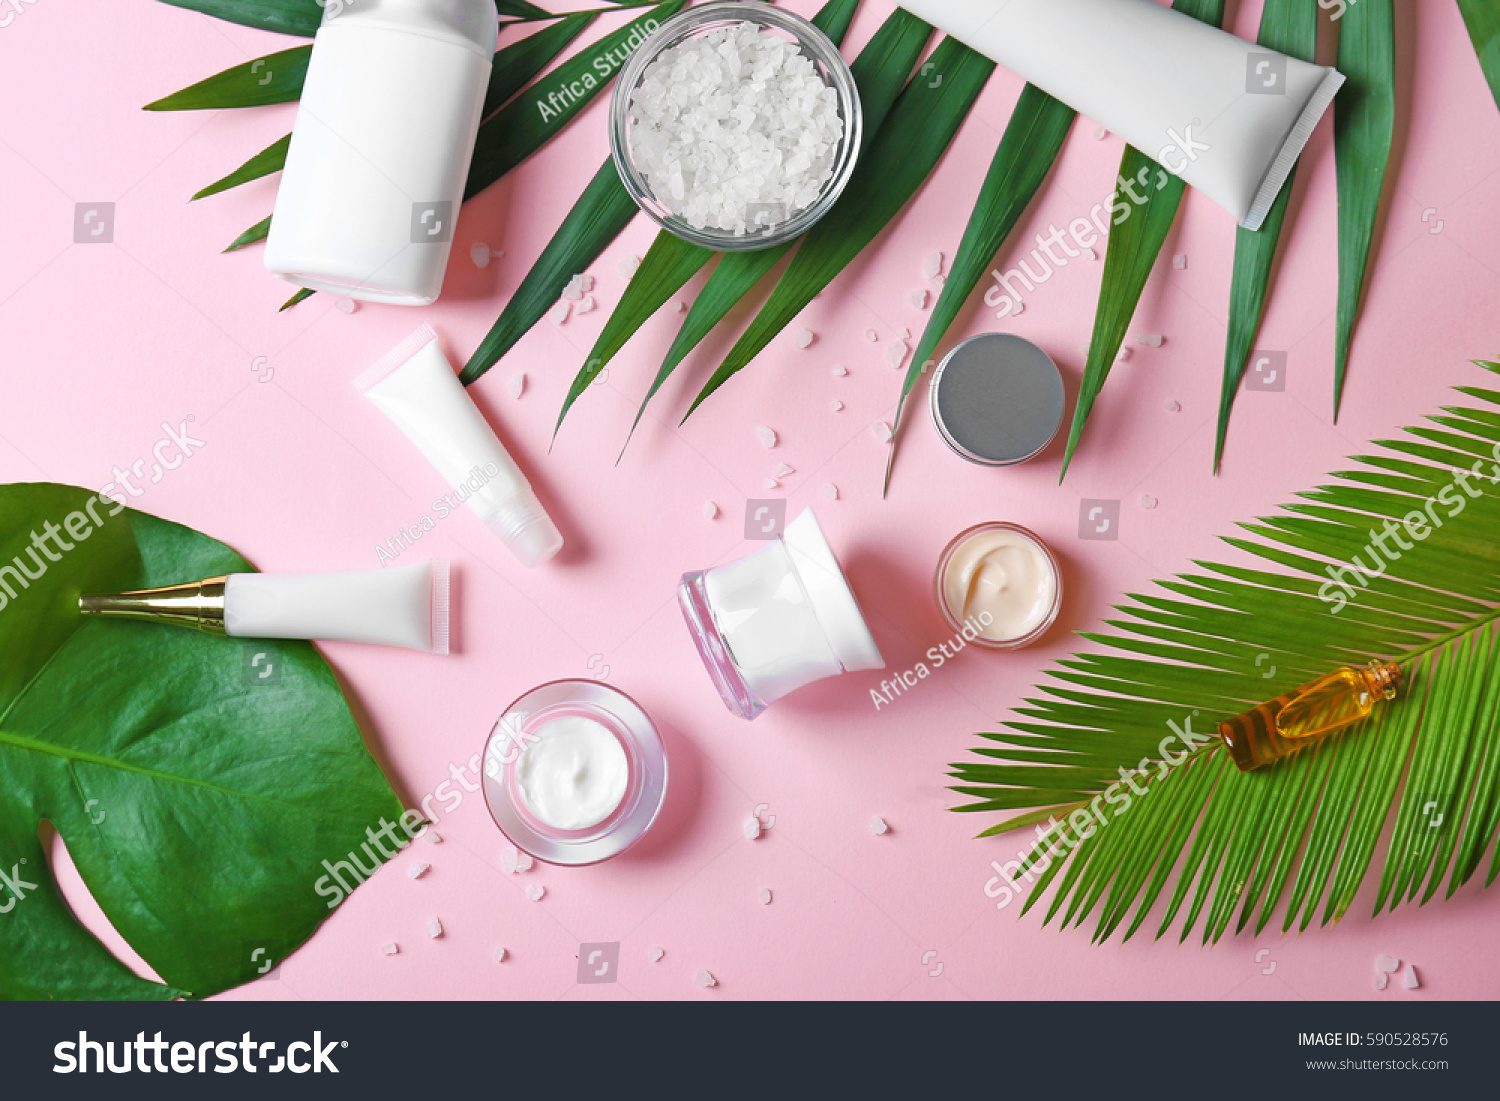 Natural cosmetics and leaves on pink background #590528576